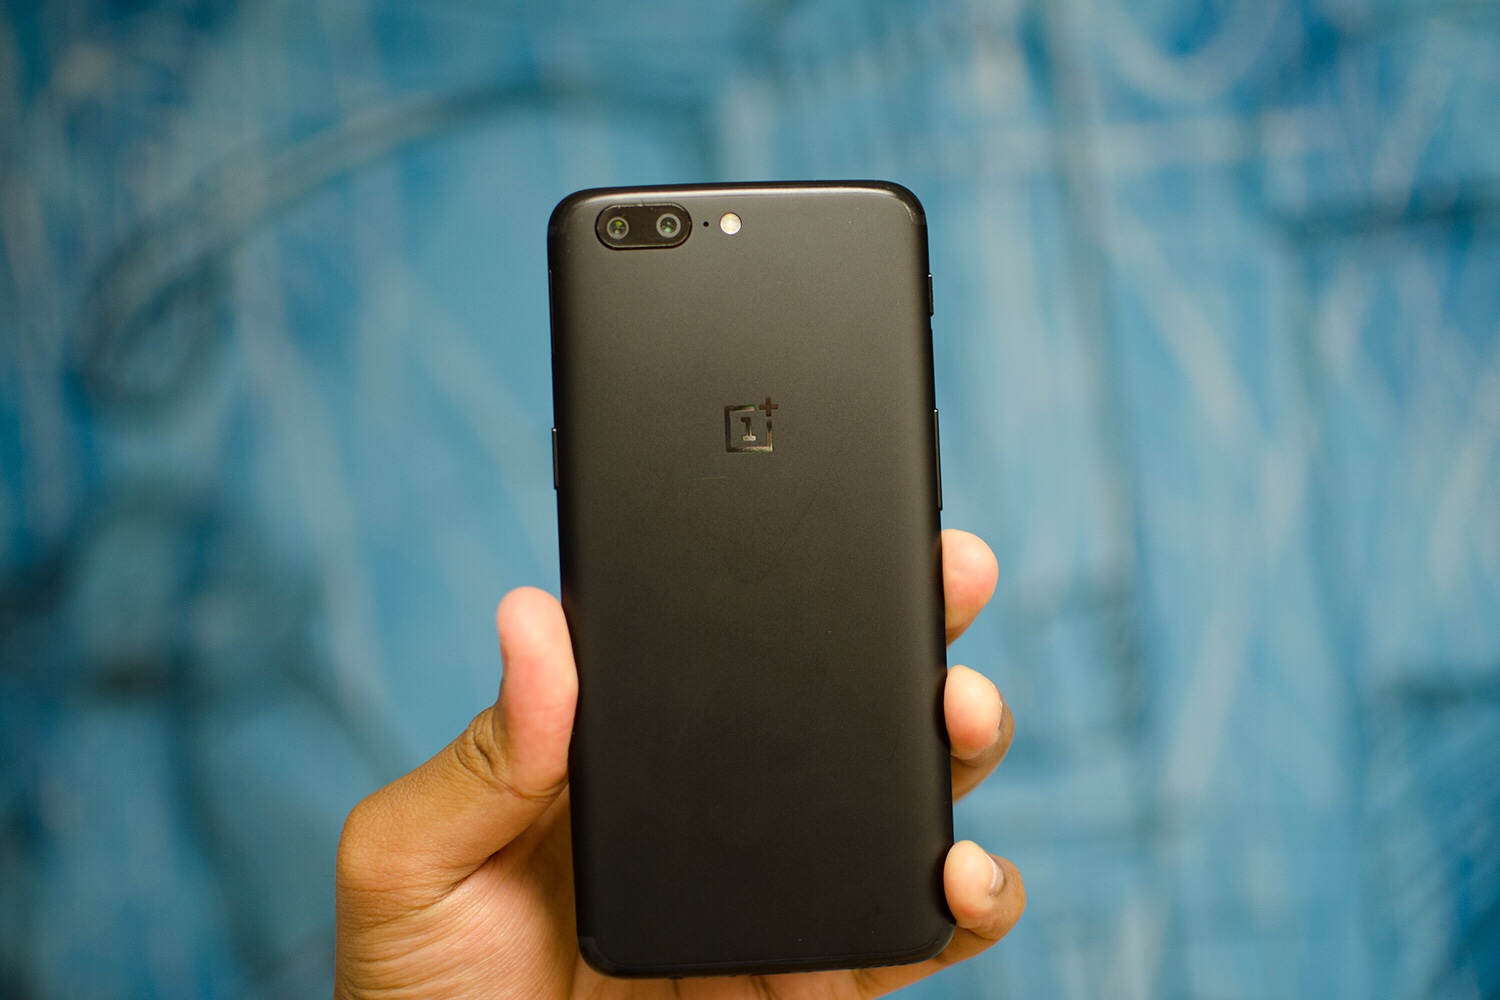 OnePlus 5 owners now have face unlock feature with OxygenOS beta